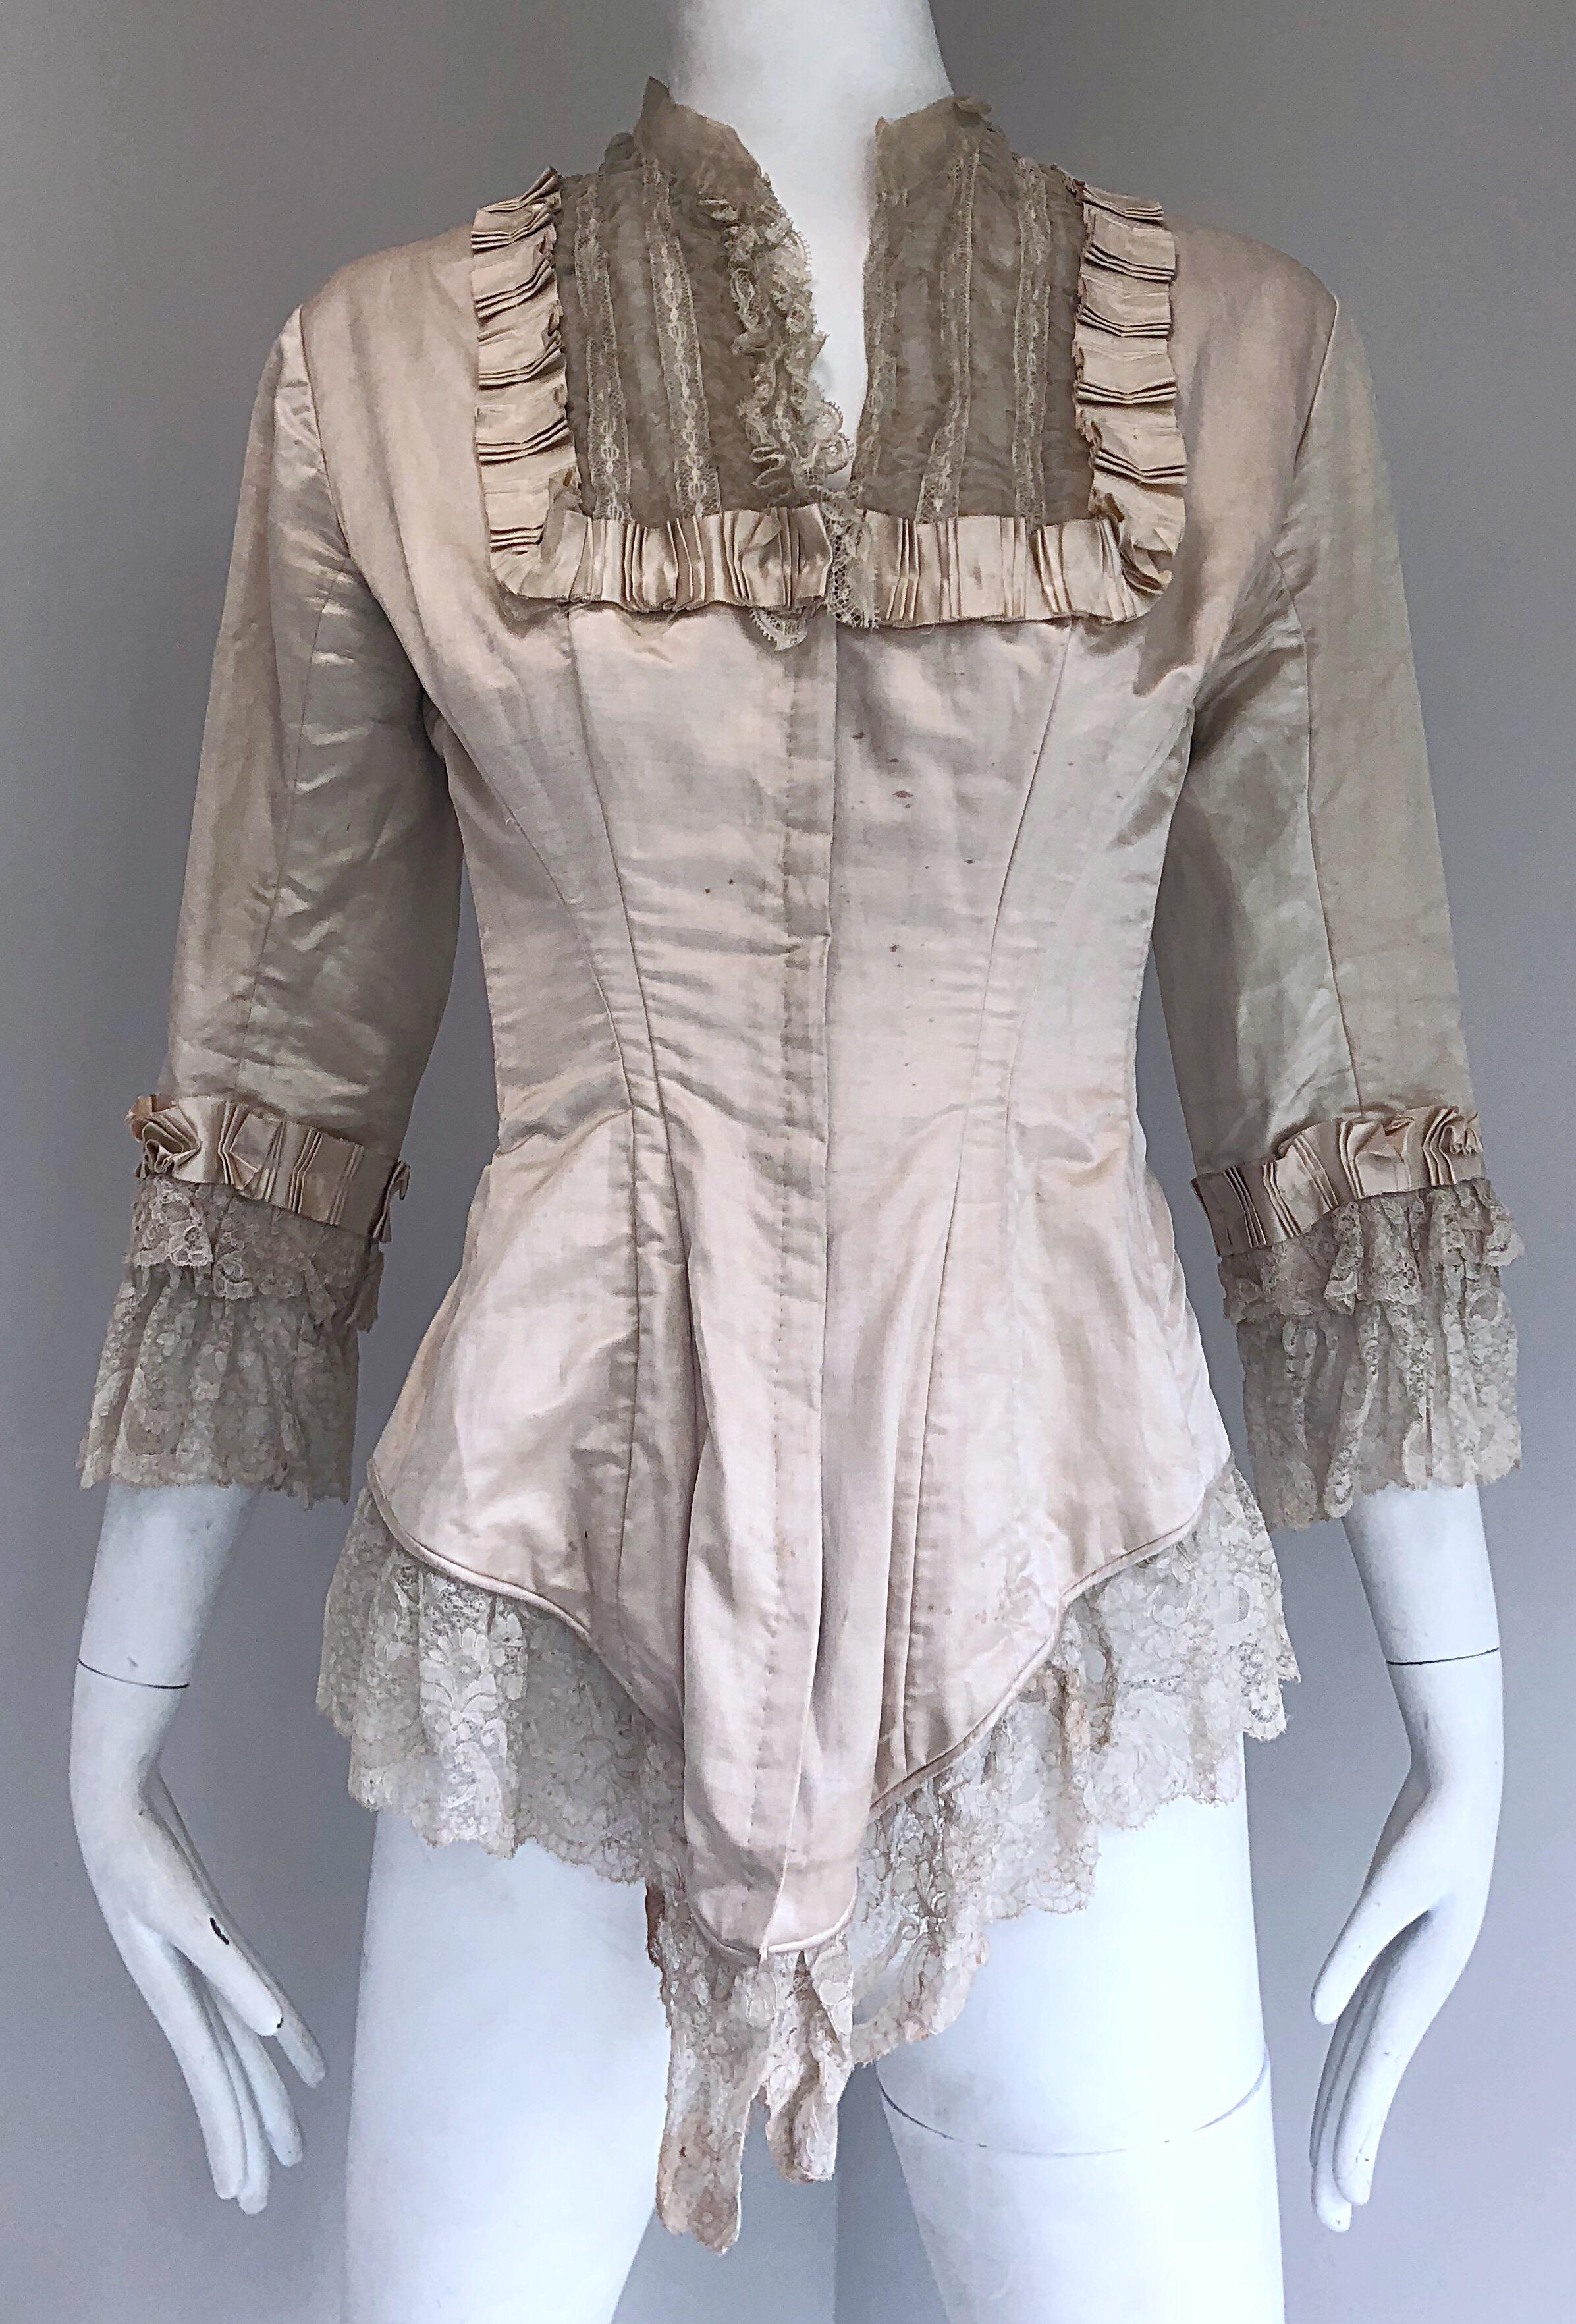 Women's 1880s Incredible Authentic Victorian Ivory Silk Lace Corset 1800s Couture Blouse For Sale